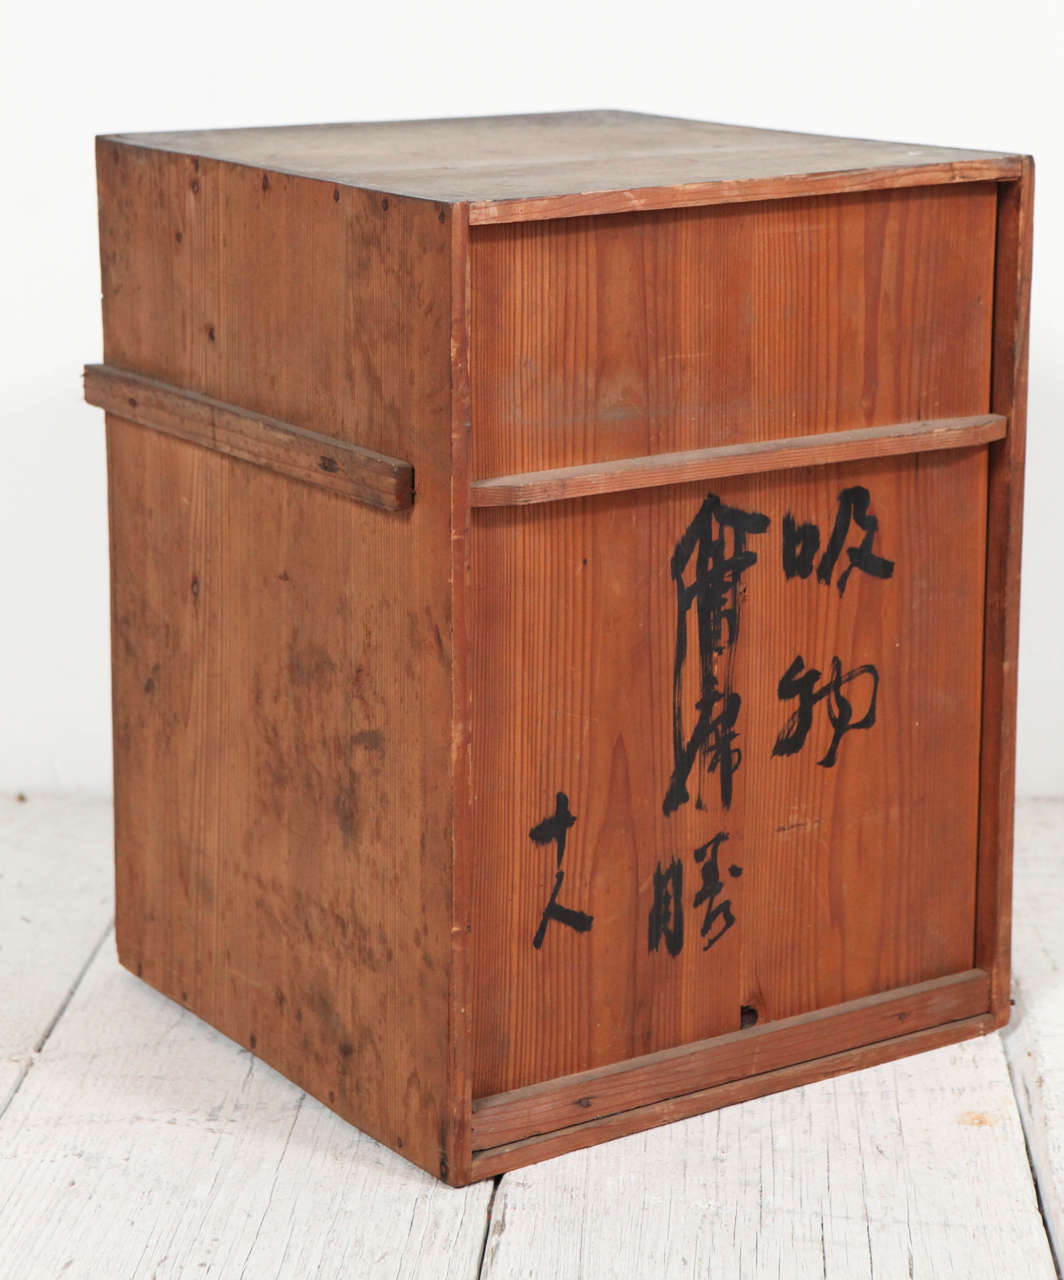 Lightweight Boxes with Japanese Calligraphy Markings 2